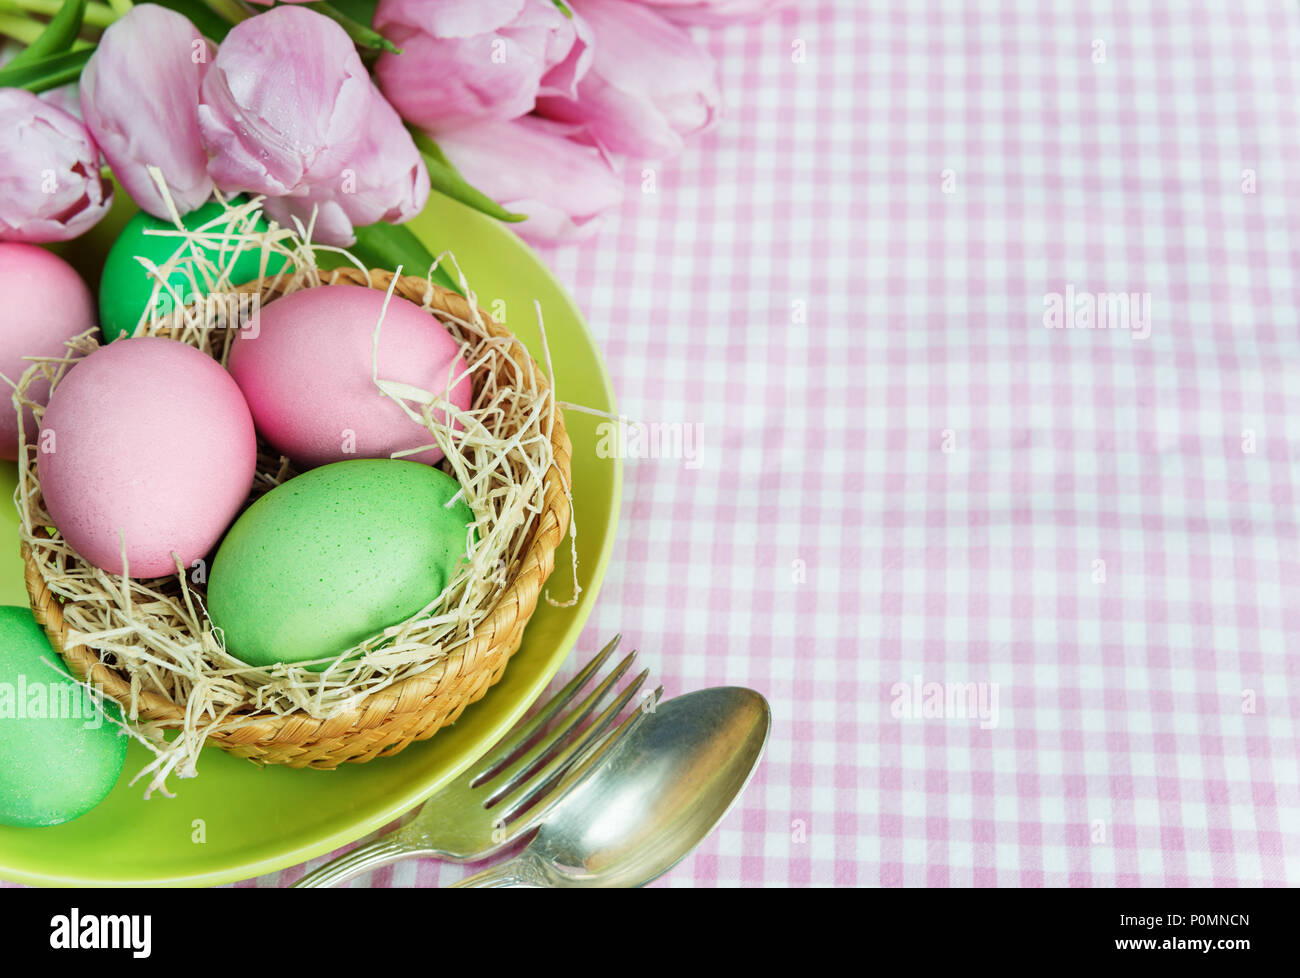 Easter concert: bouquet of pink tulips flowers and Easter eggs, plate and cutlery on checkered tablecloth, with copy-space Stock Photo